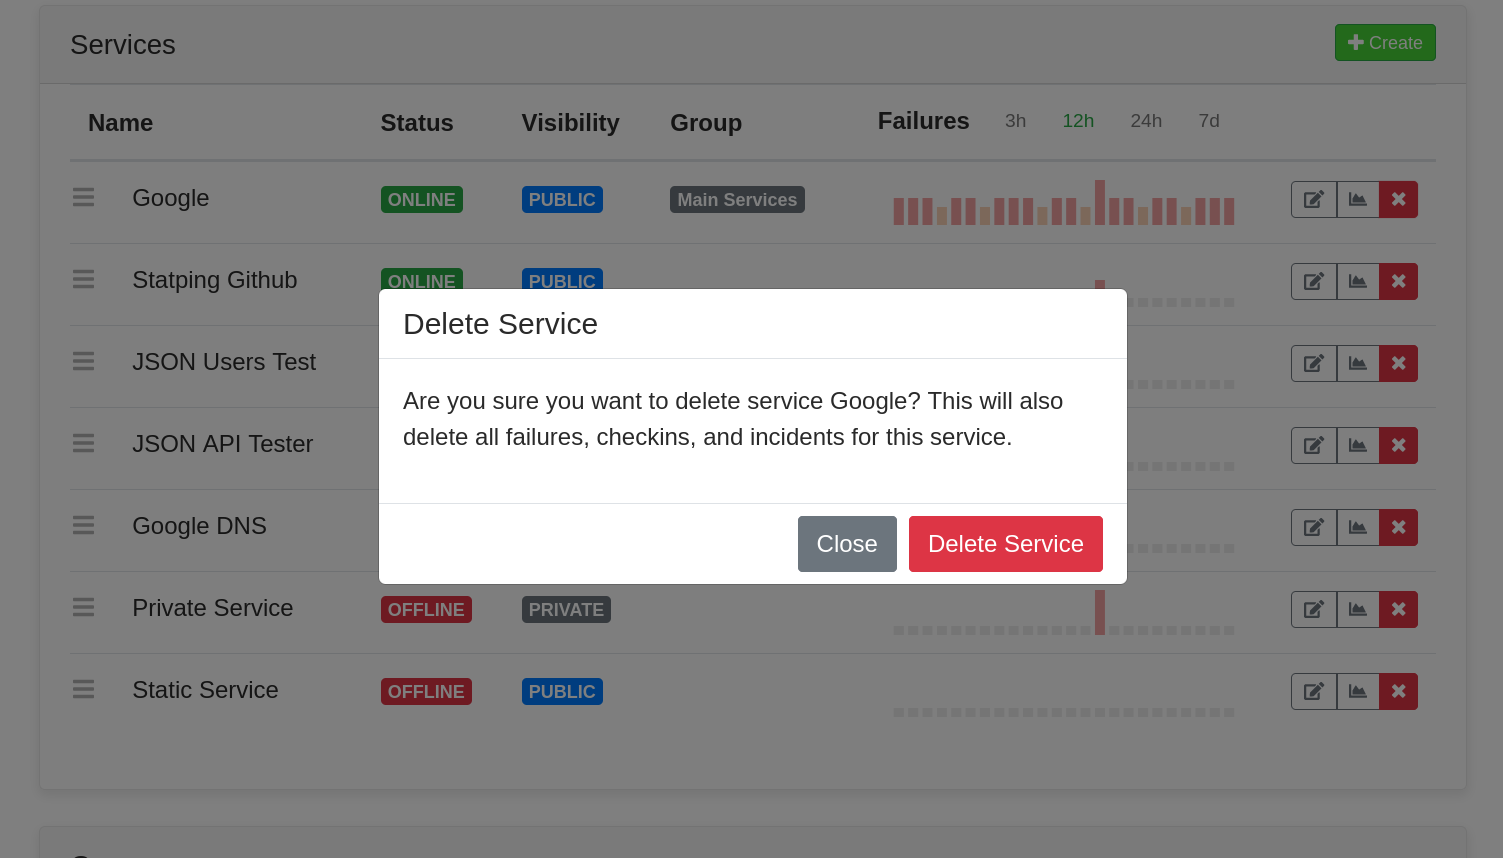 Statping showing a dialog box asking if we want to delete the Google service